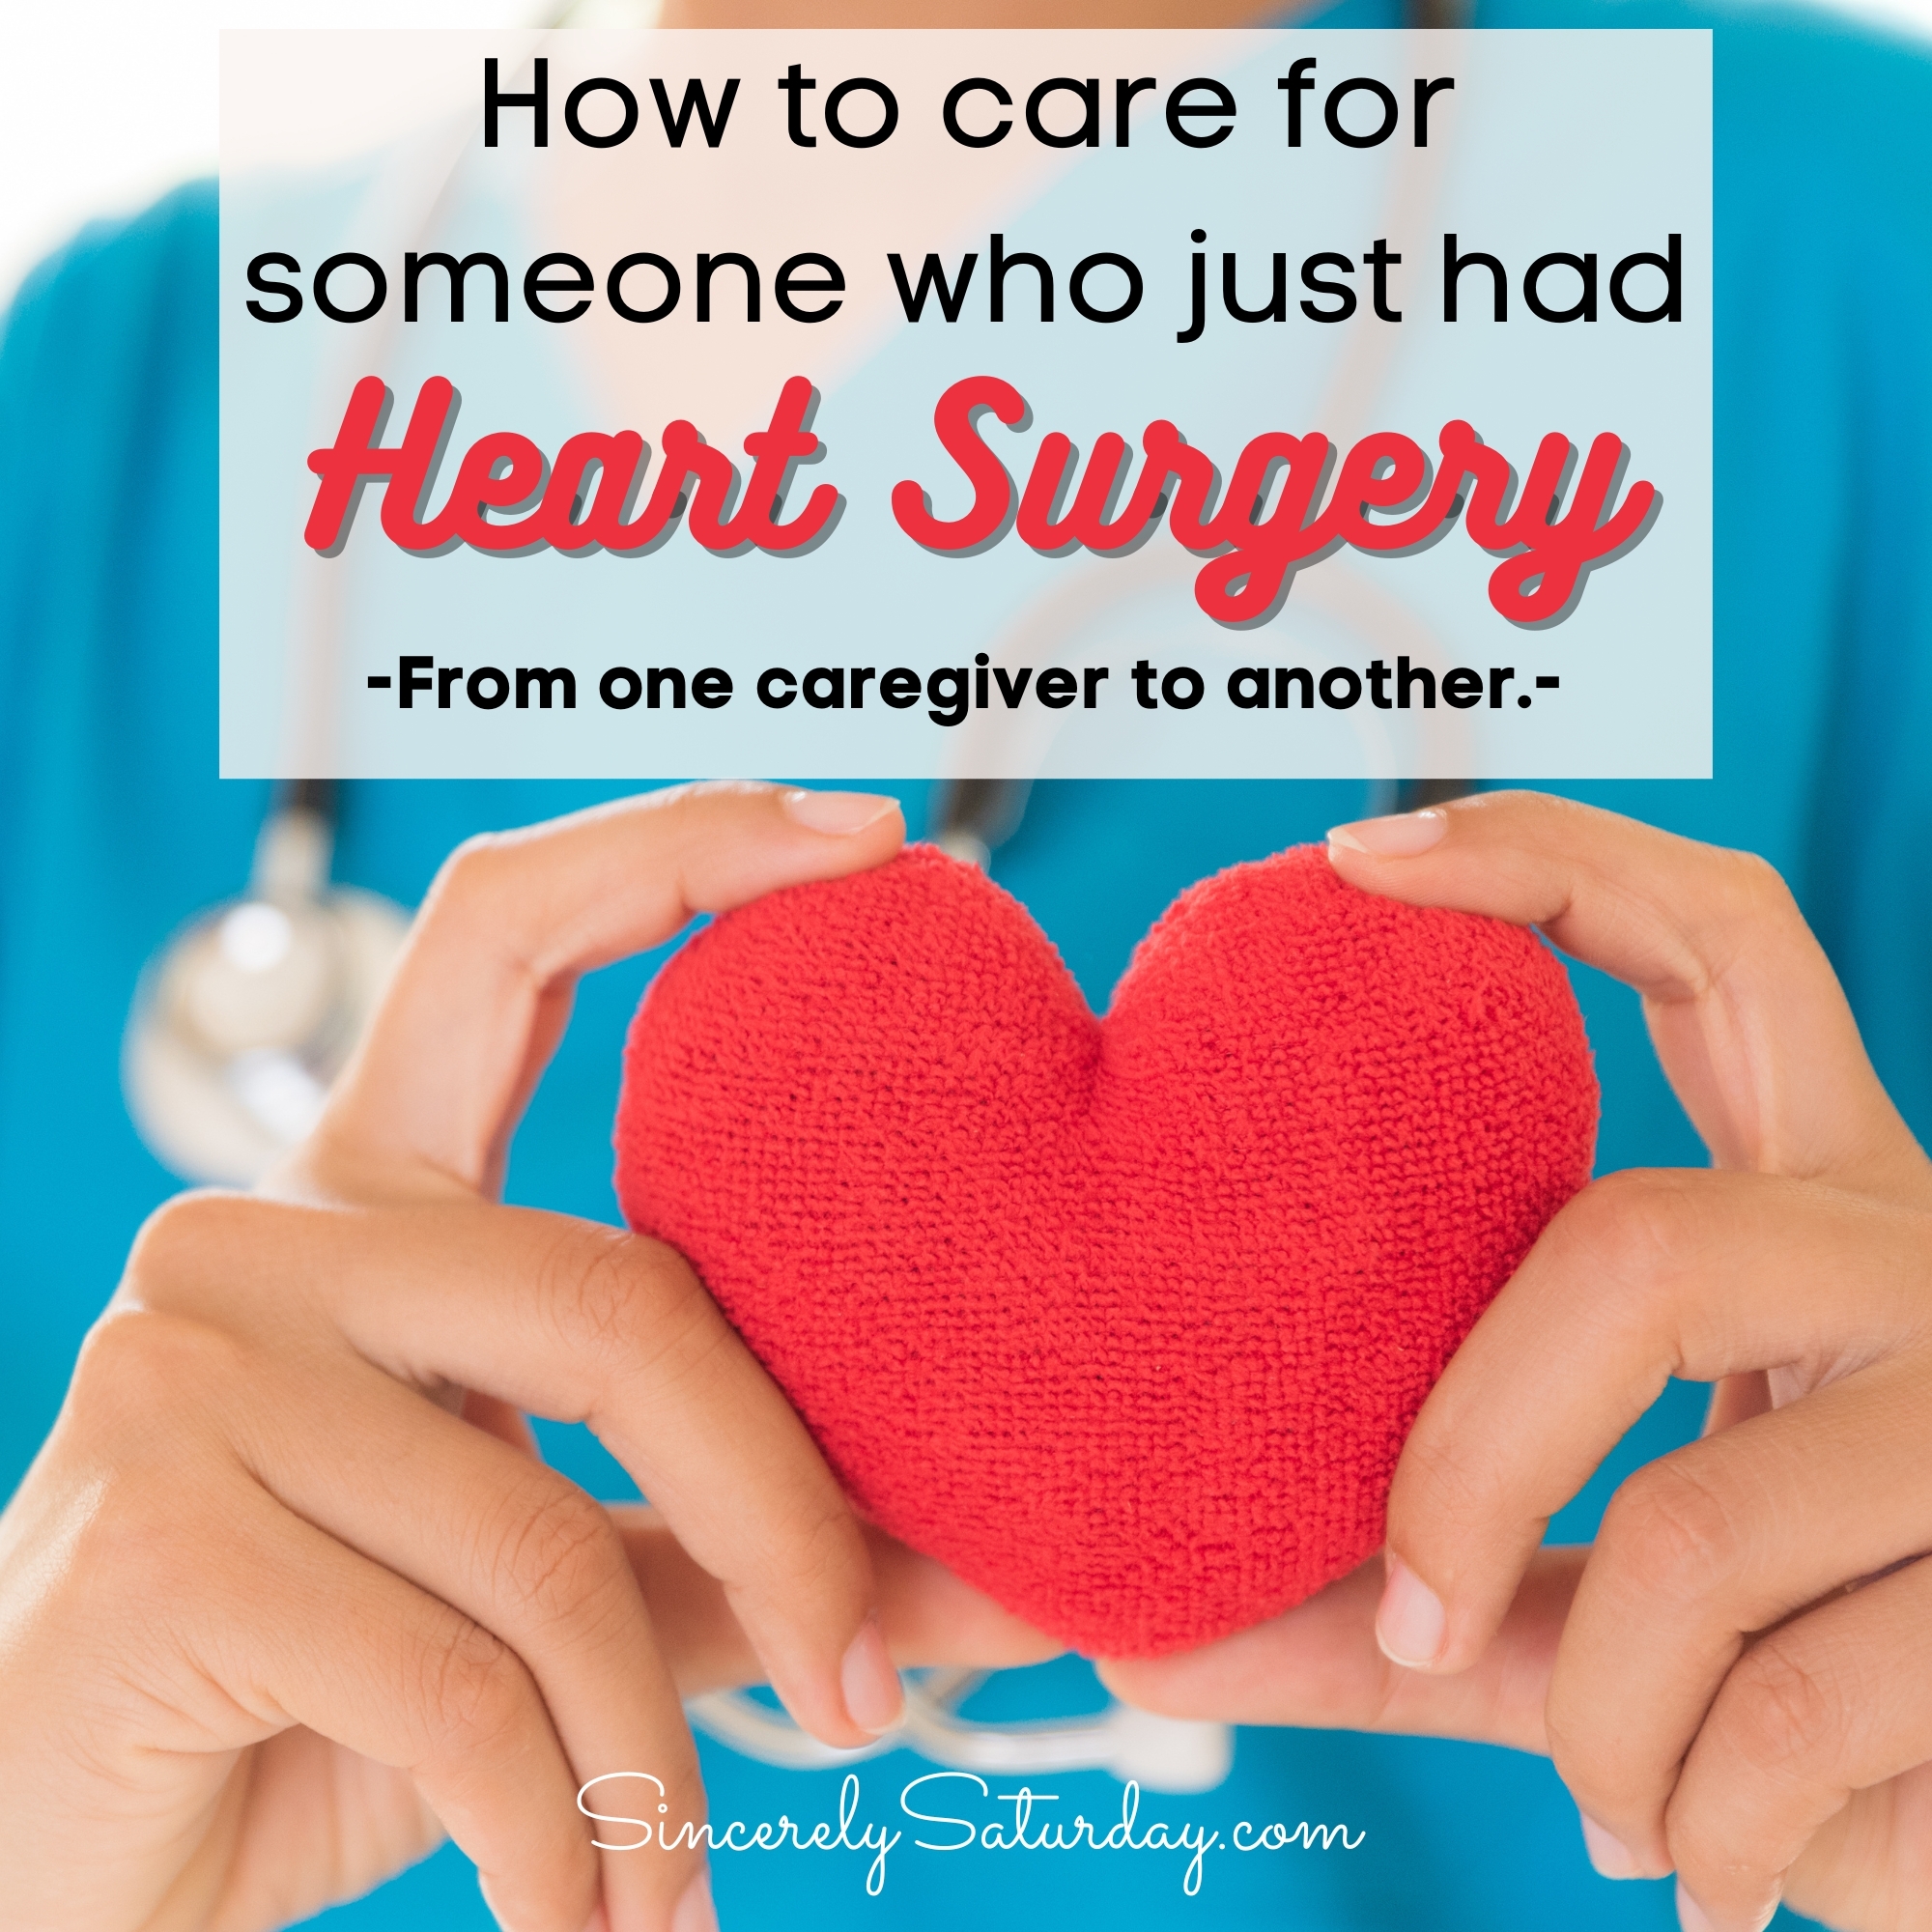 How to care for someone who just had open heart surgery - from one caregiver to another.